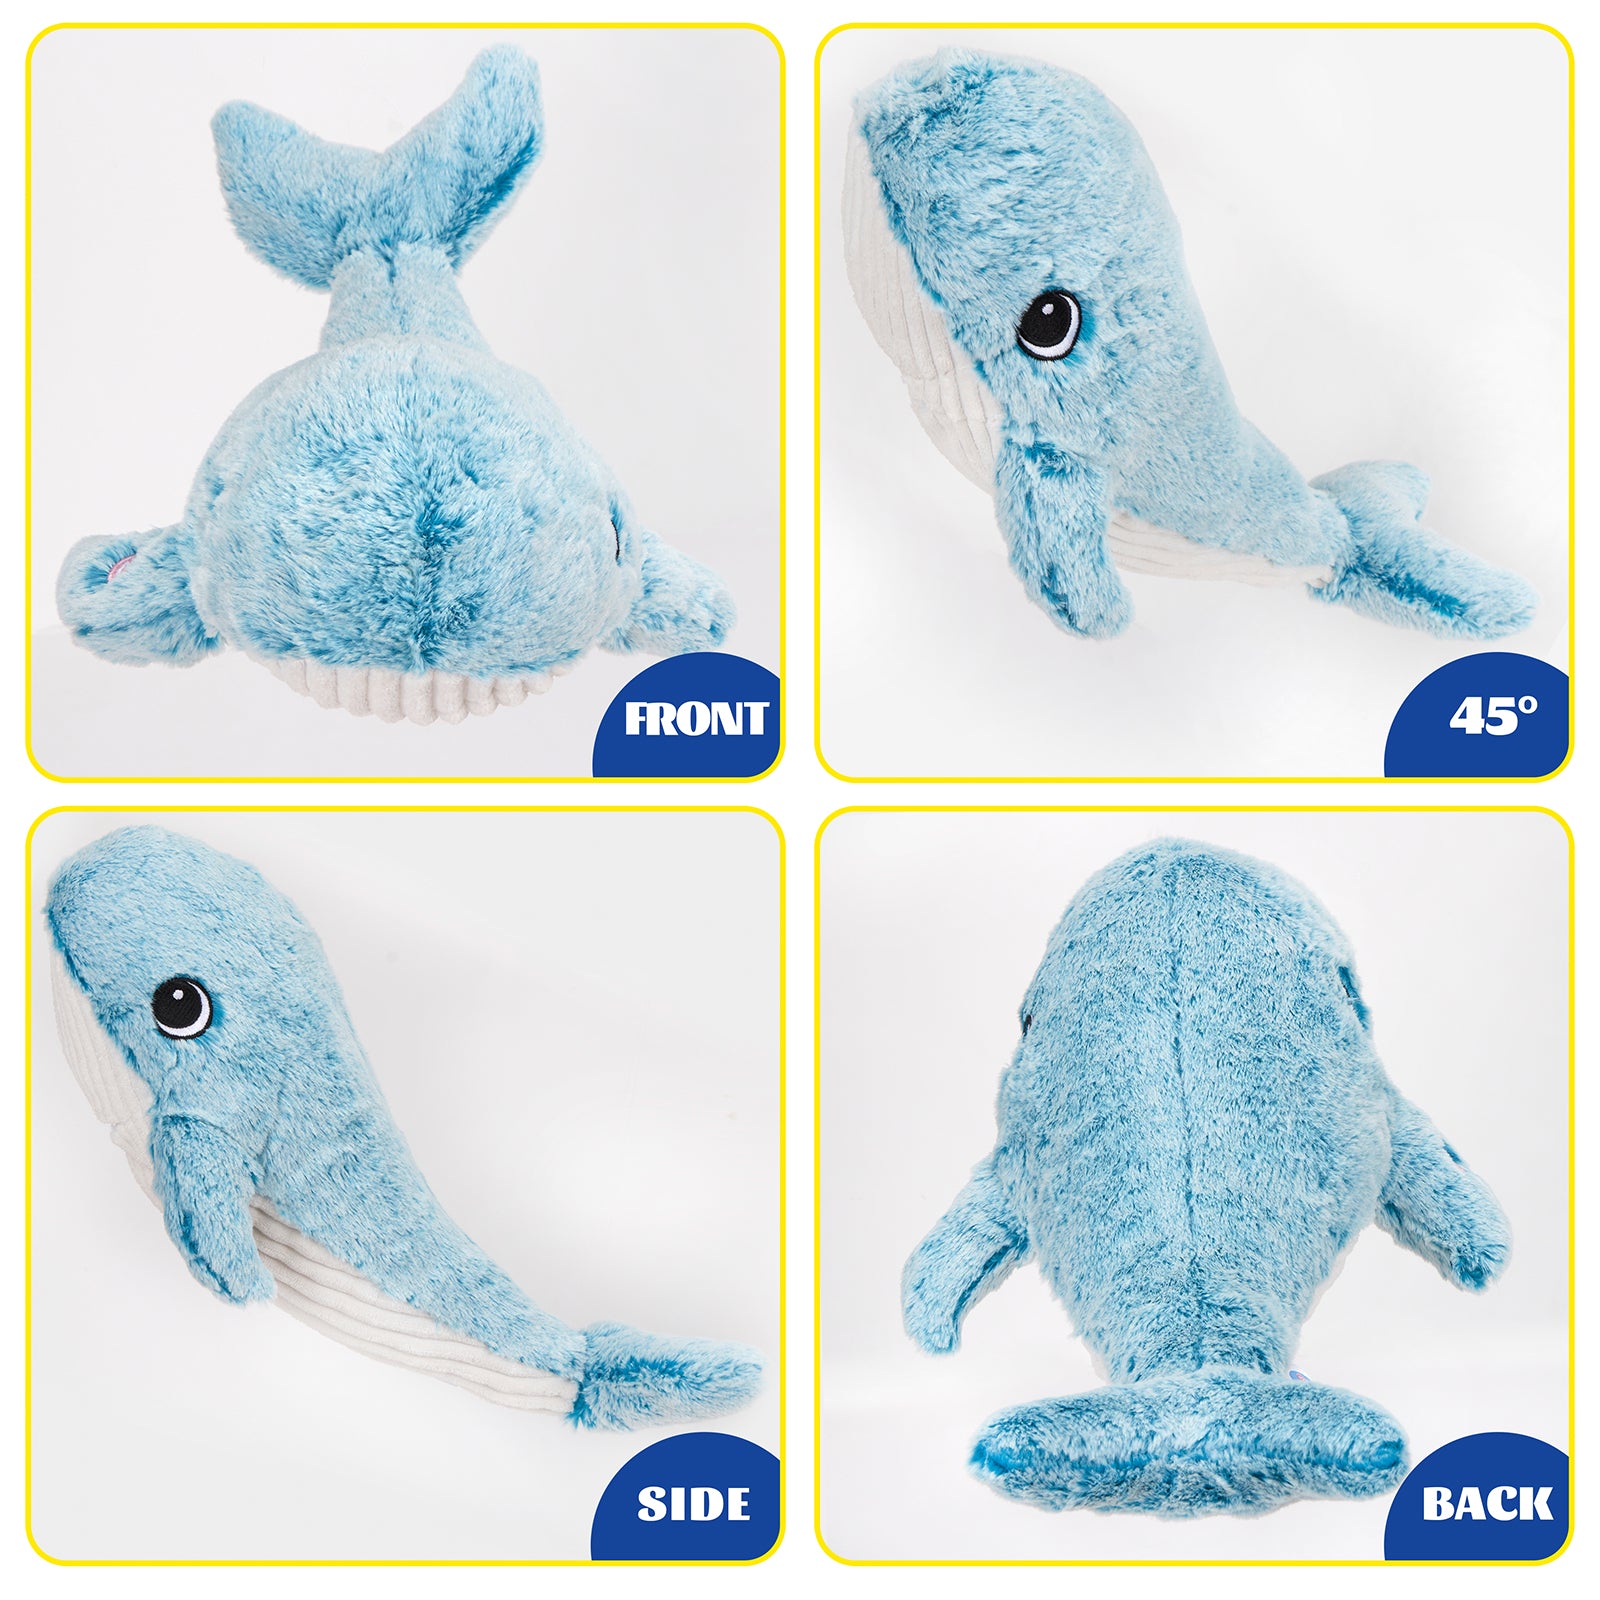 Glow Guards 18'' Light up Whale Blue Plush Soft Toy Ocean Stuffed - Glow Guards